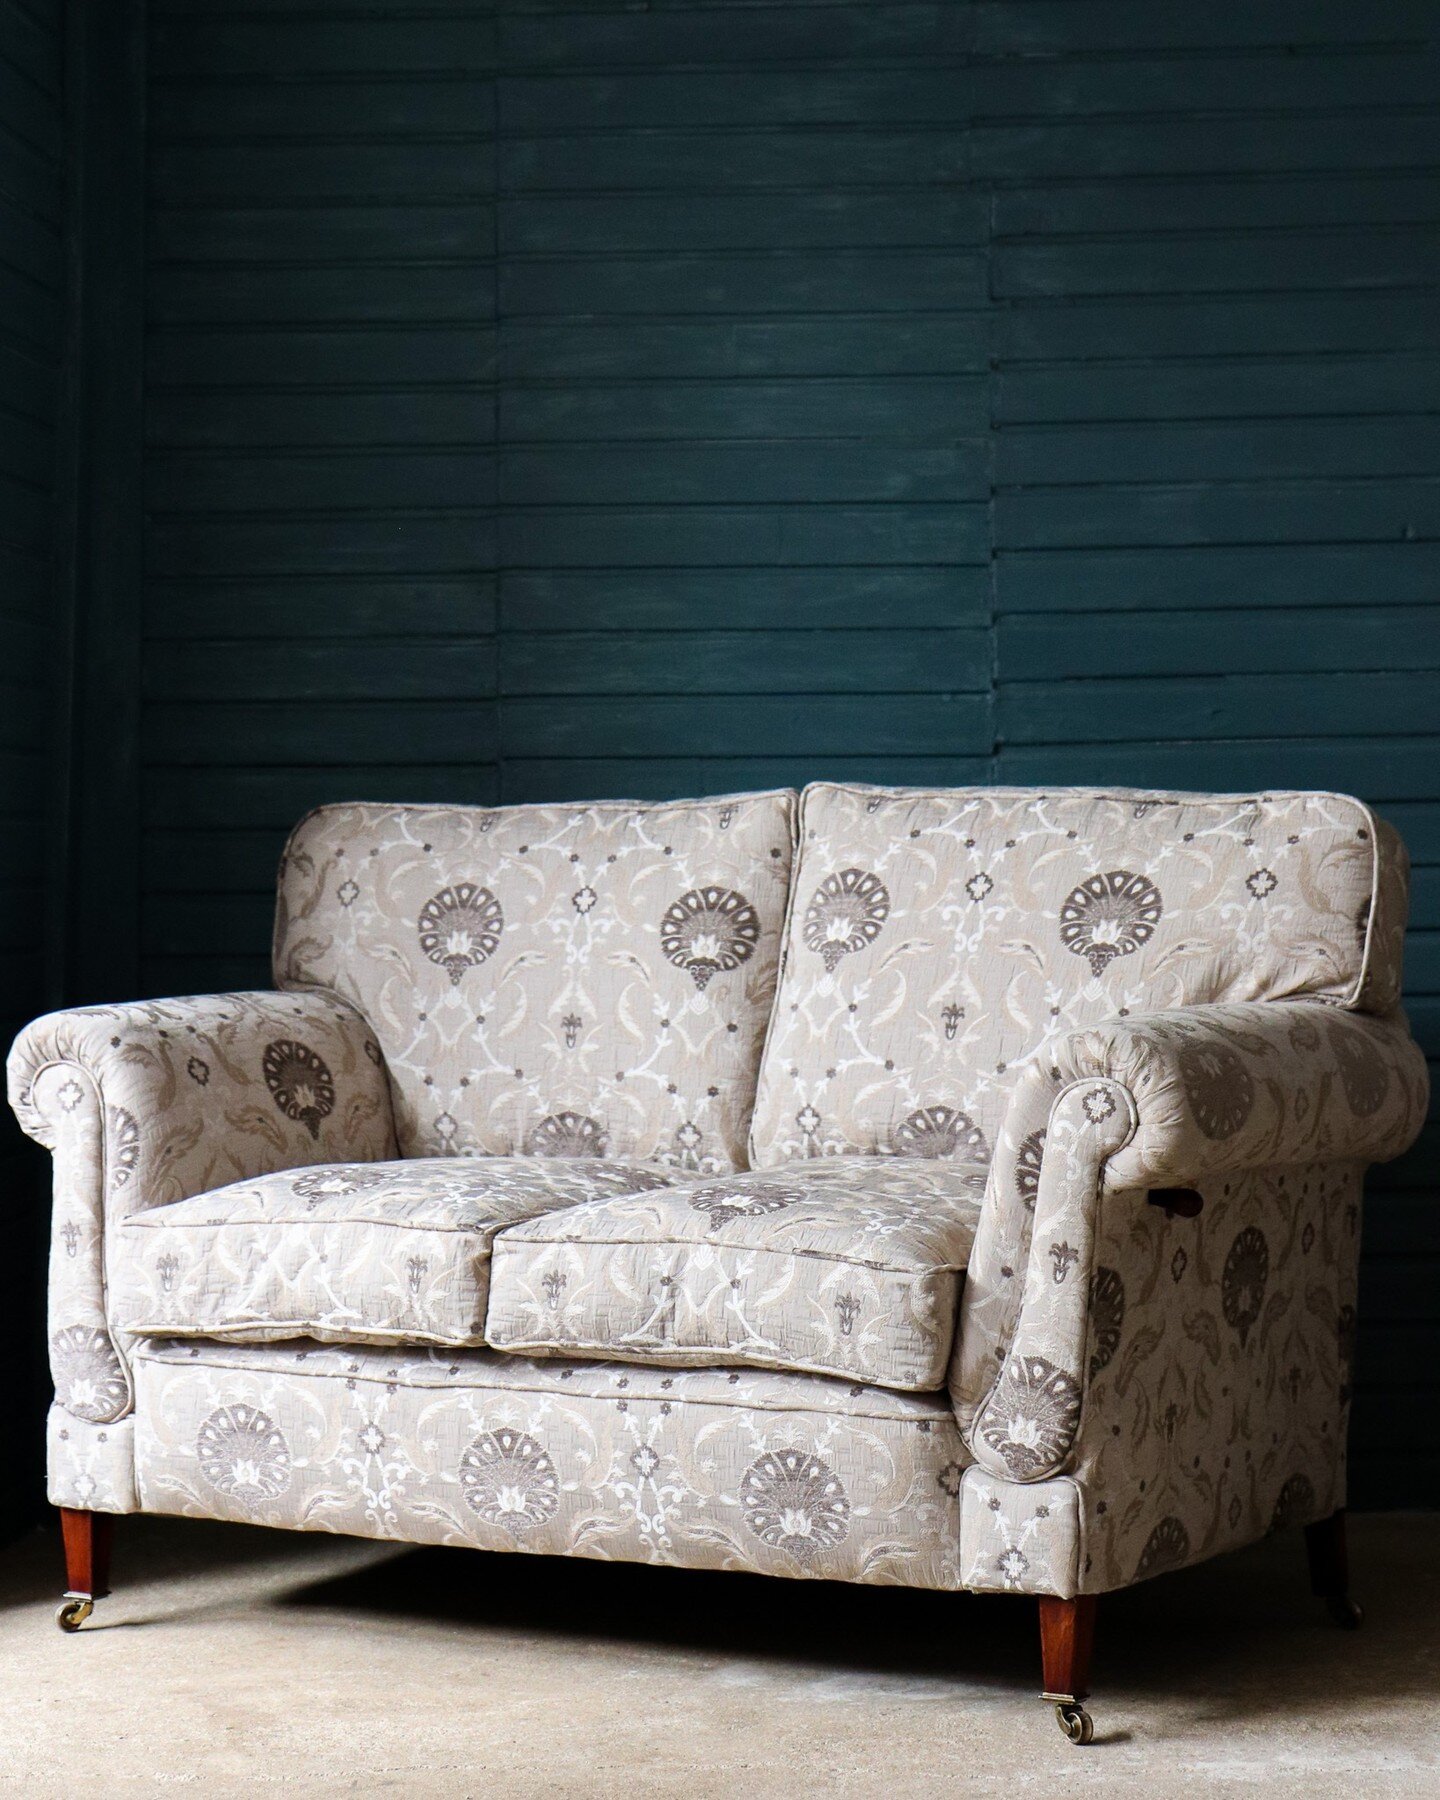 Supreme luxury! Edwardian drop-arm sofa, completely re-upholstered traditionally using coil springs and horsehair which is hand tied and stitched in place and topped with down and feather cushions for sublime comfort. Fabric @jimdickensengland

#edwa